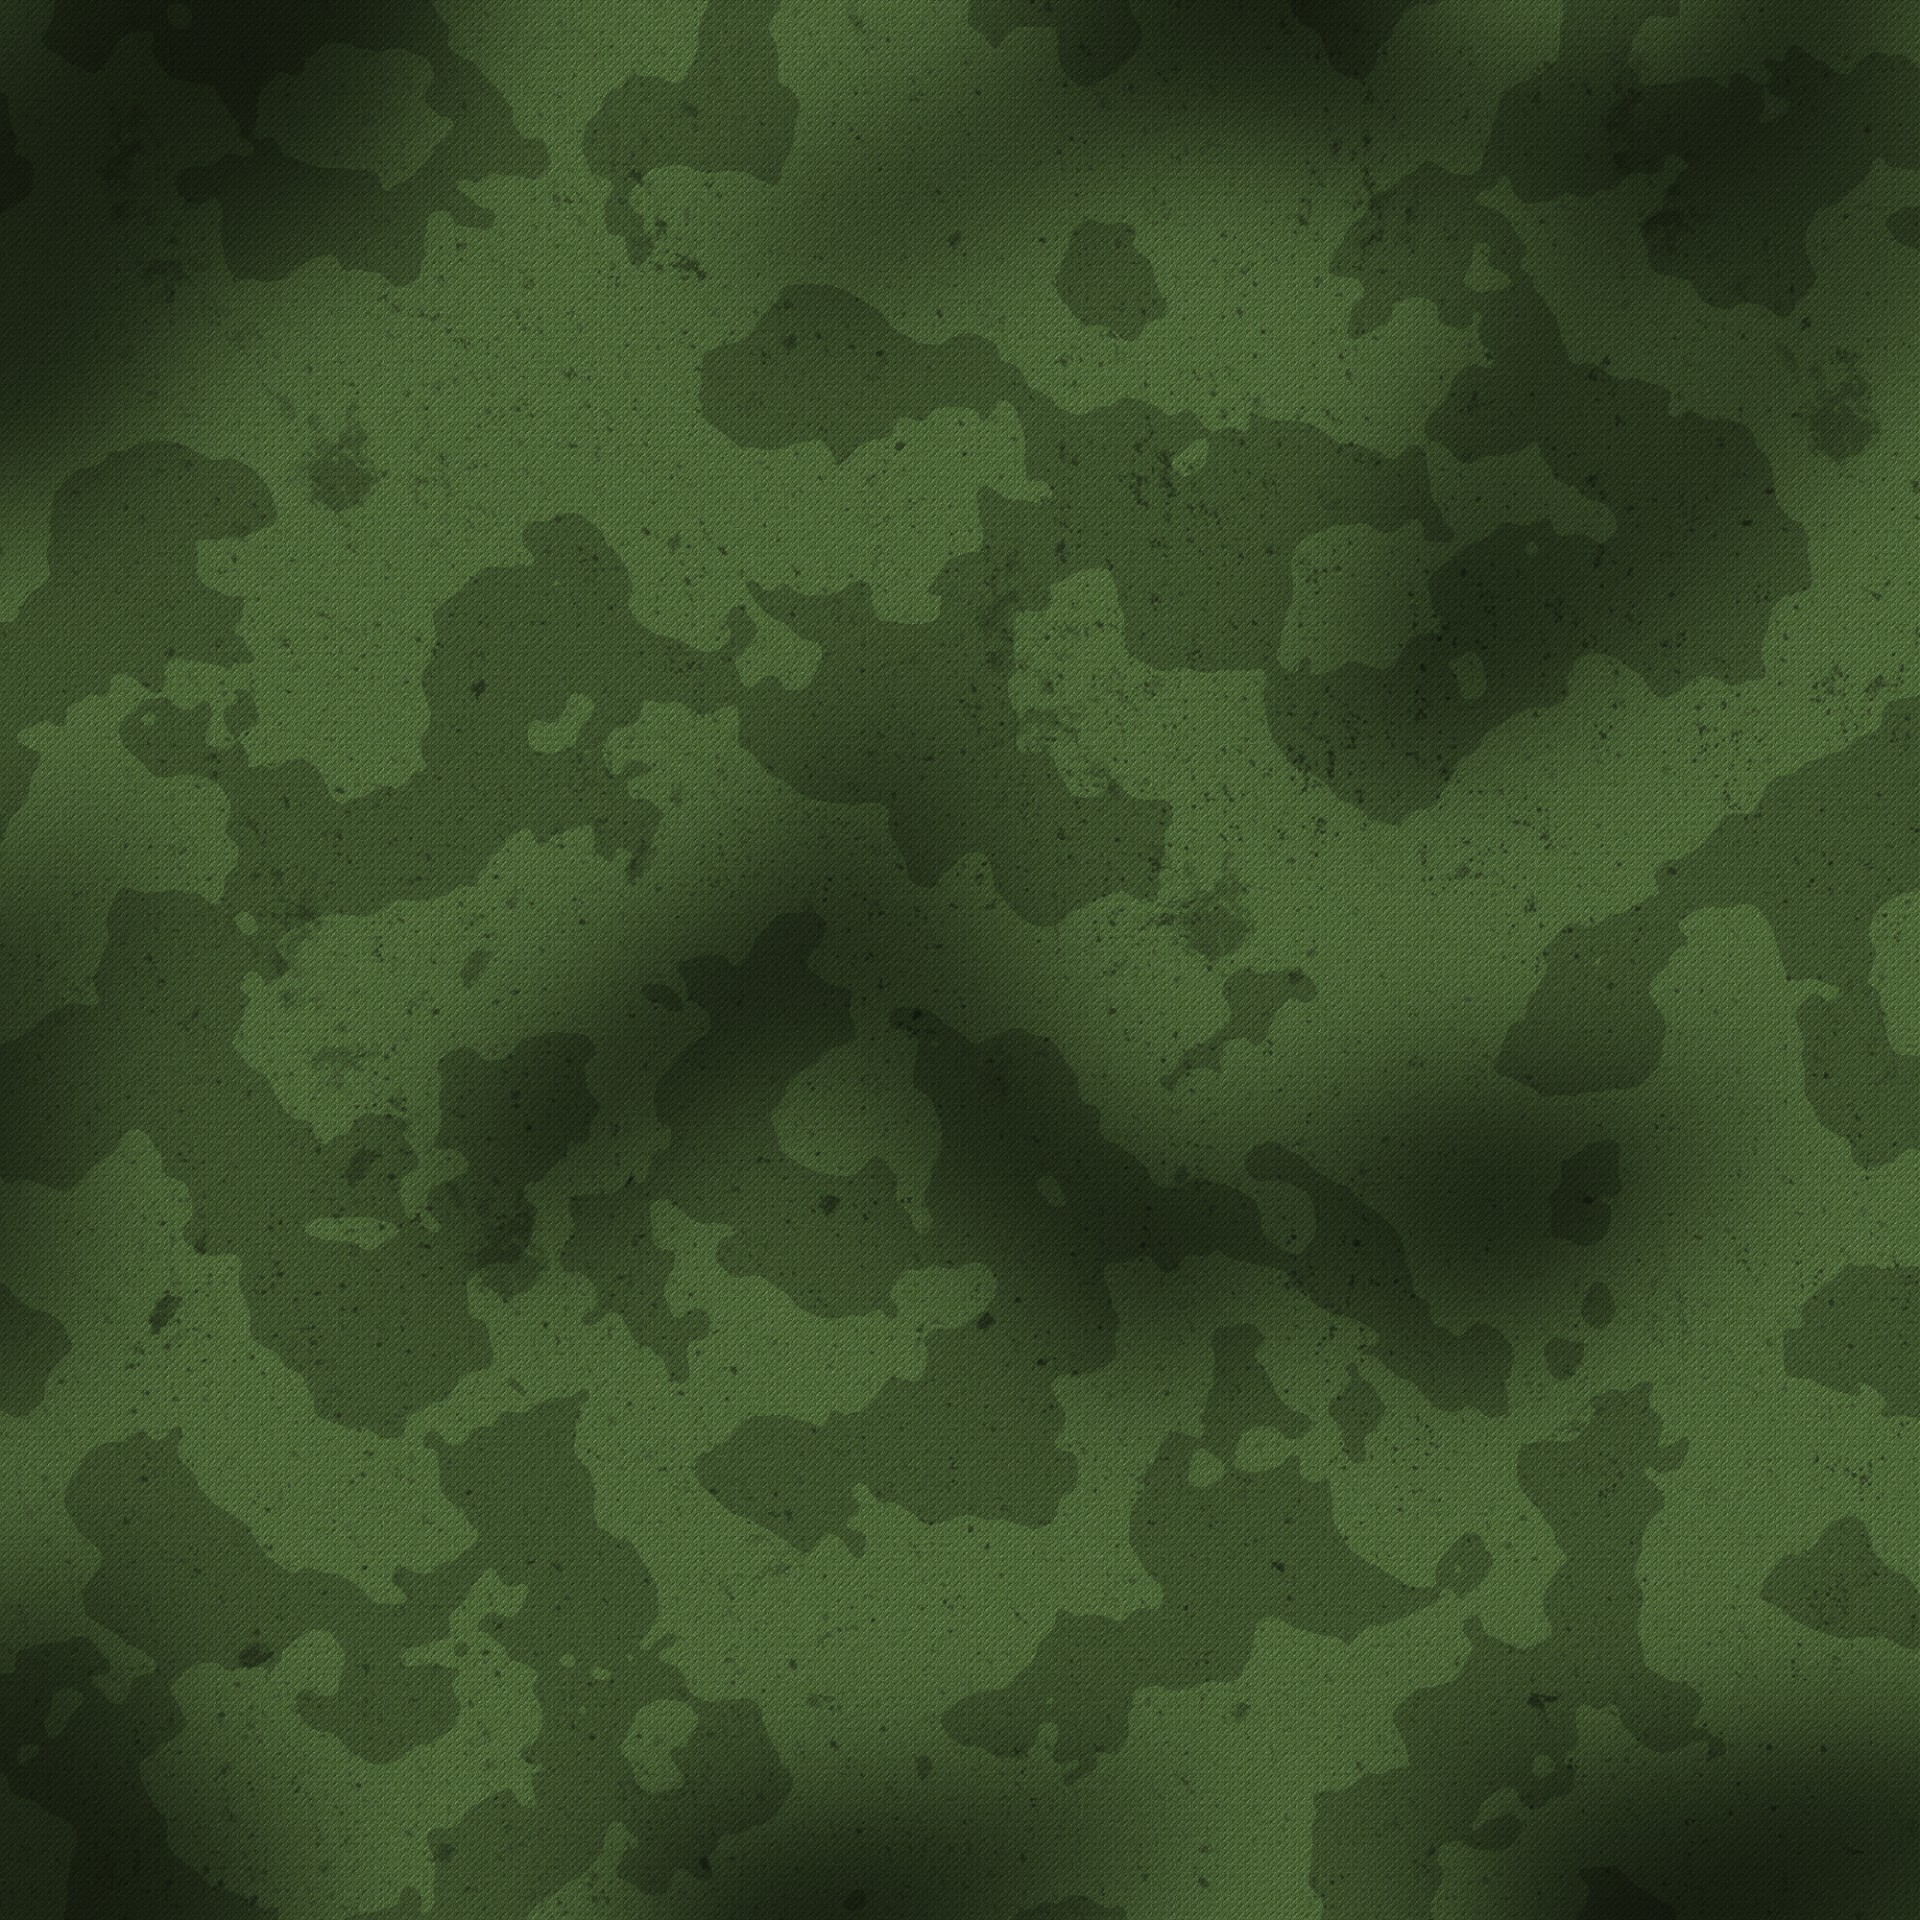 camouflage army military free photo